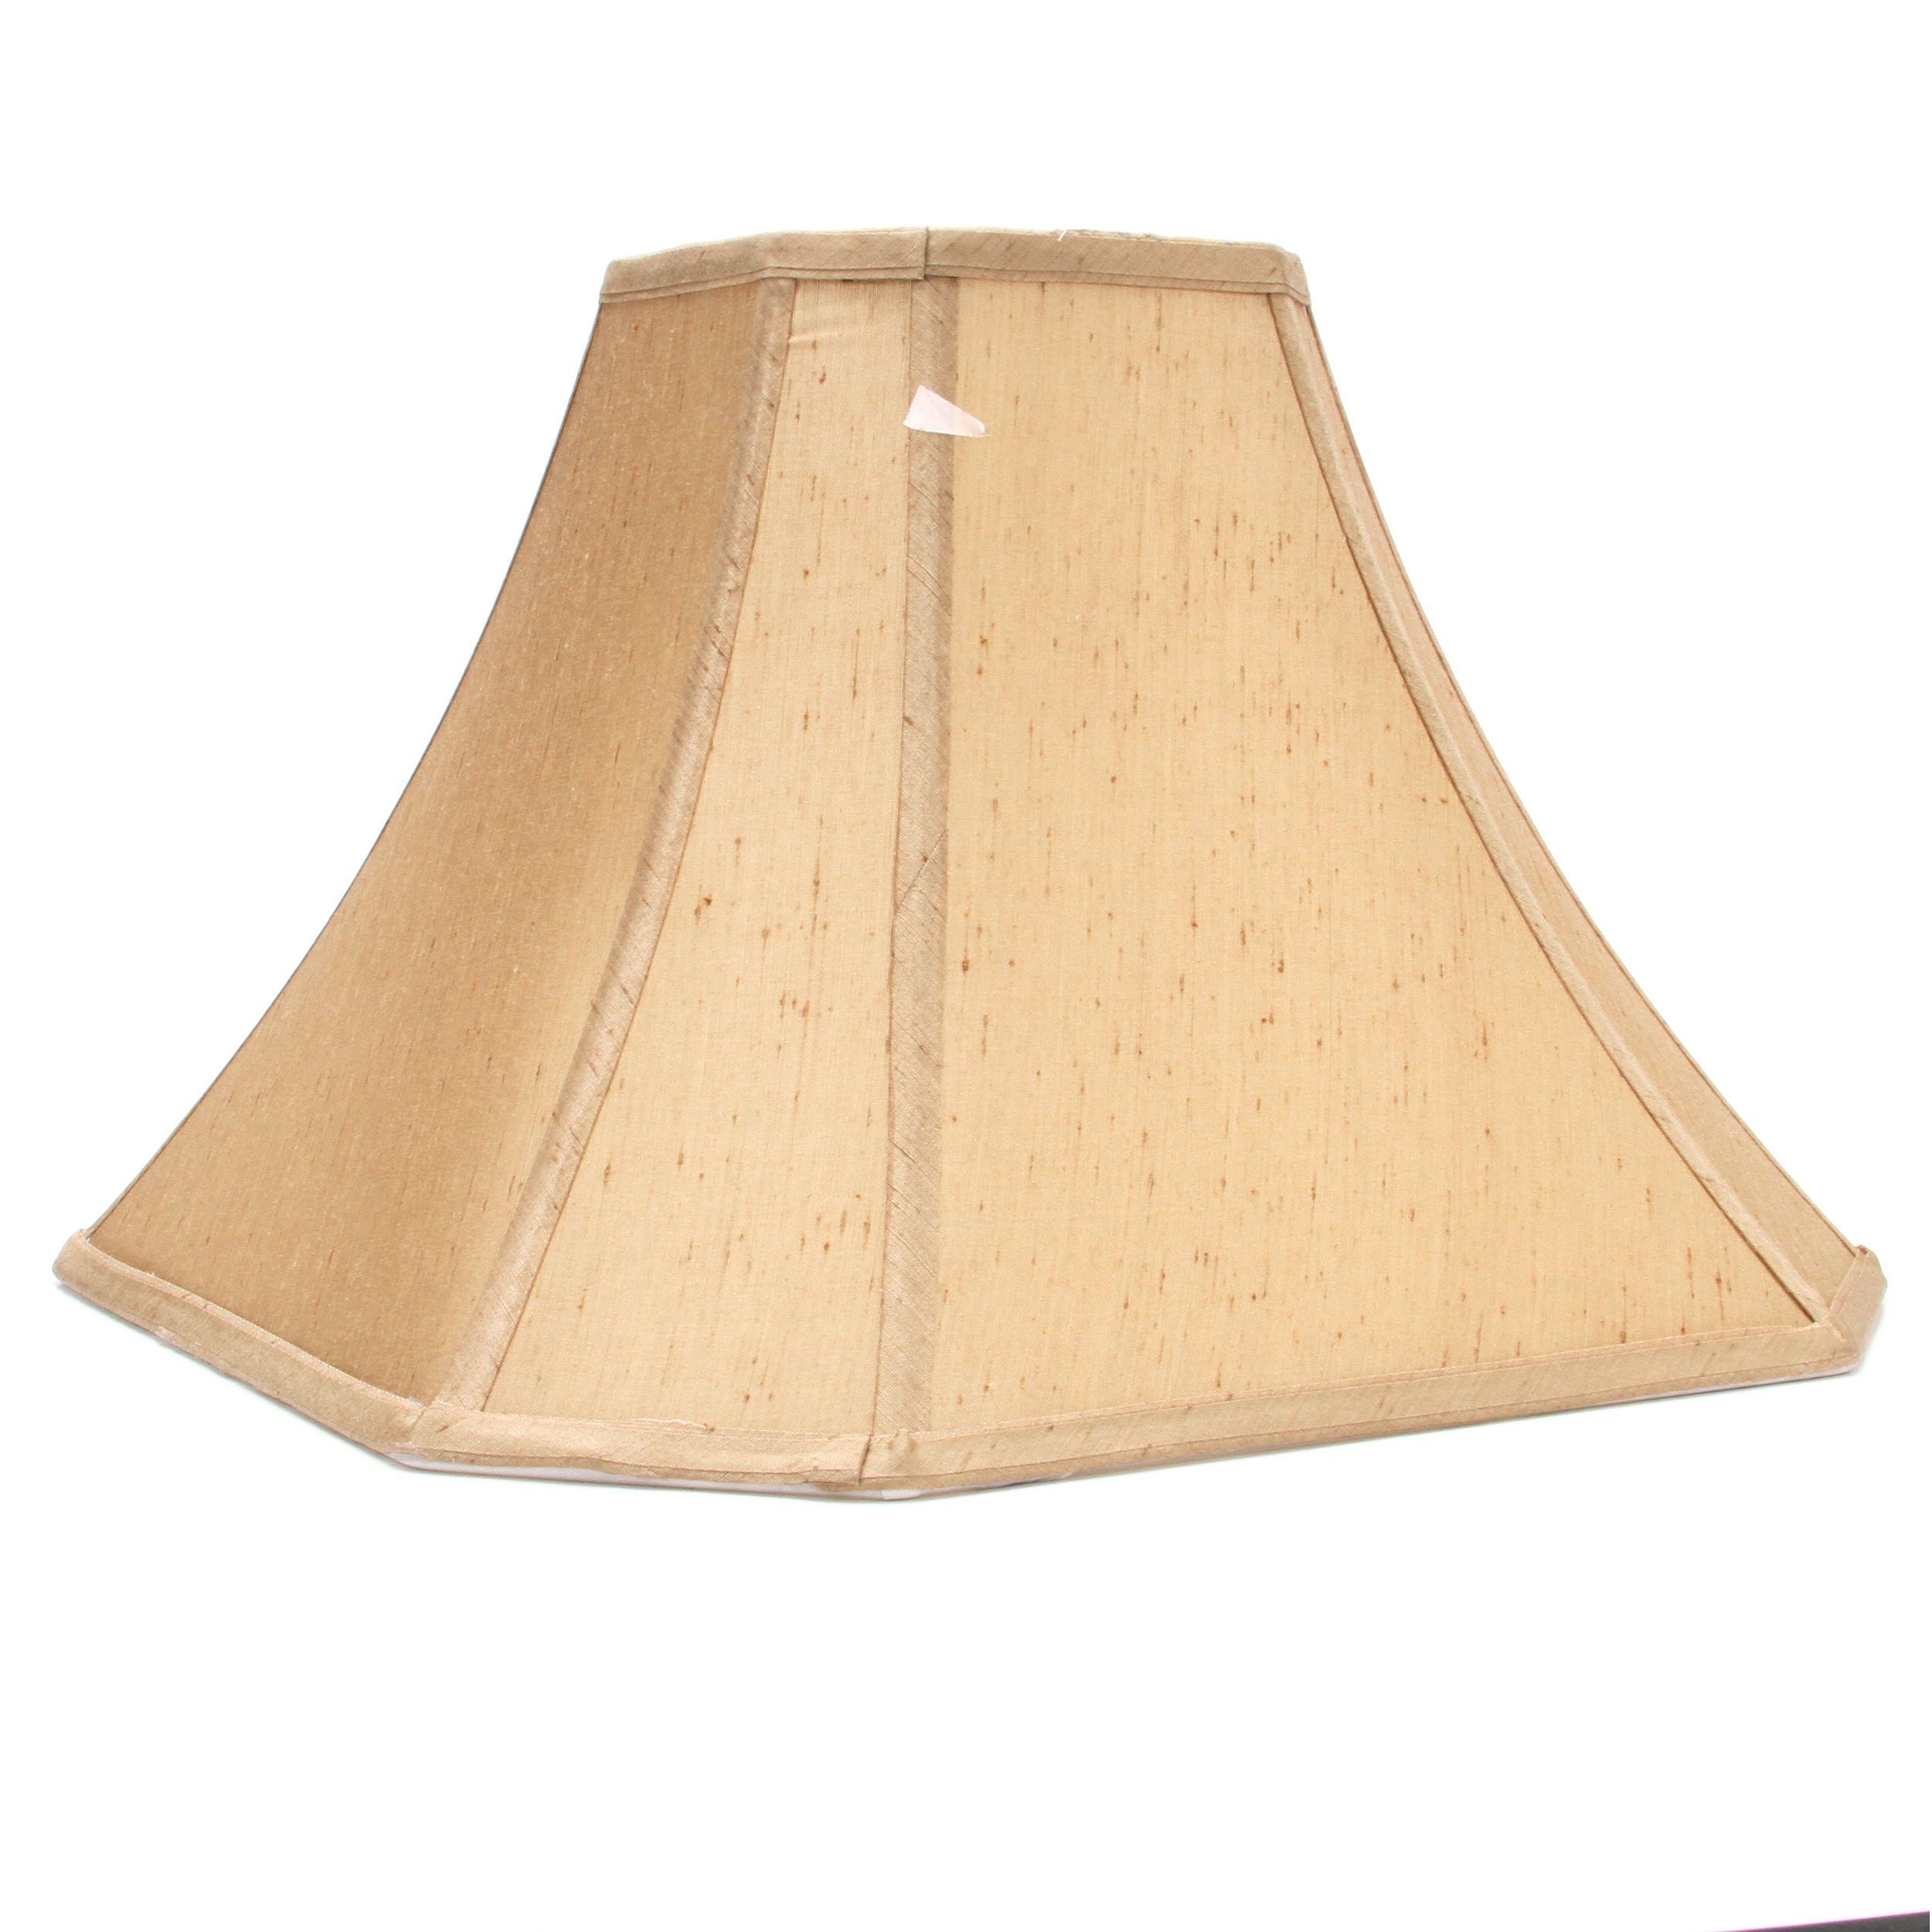 Handcrafted Wooden Apple Lamp Shade Finial available in 4 different colors 